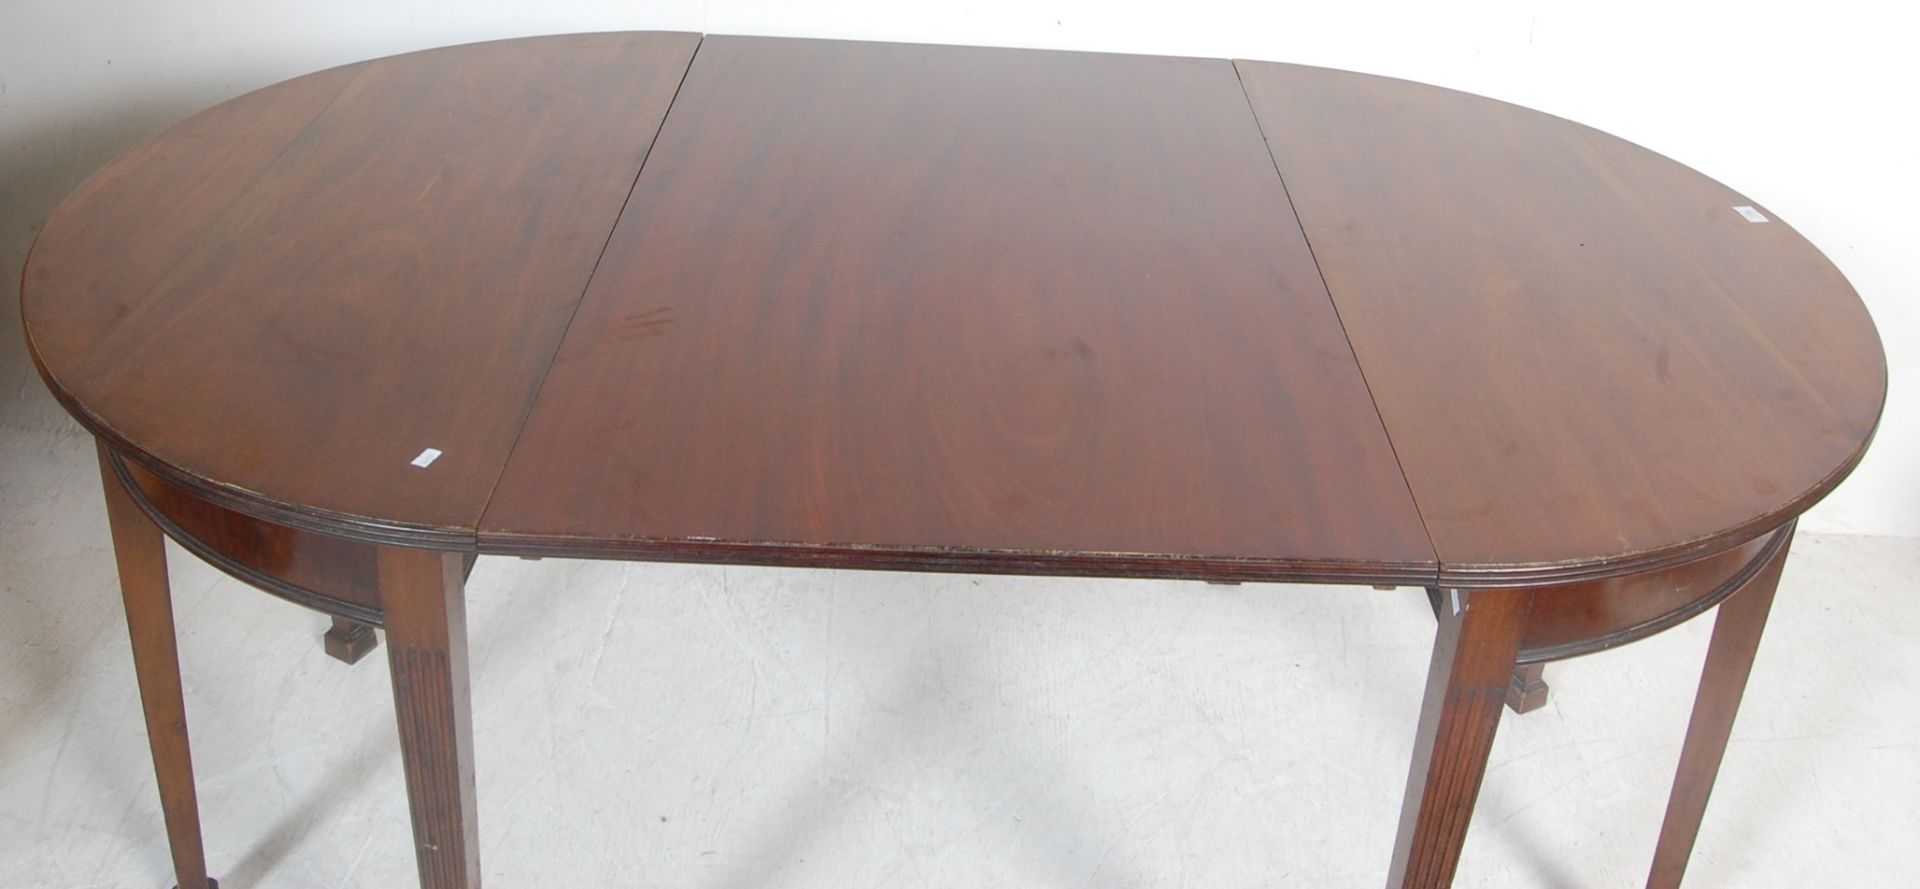 19TH CENTURY GEORGE III MAHOGANY D-END DINING TABLE - Image 5 of 6